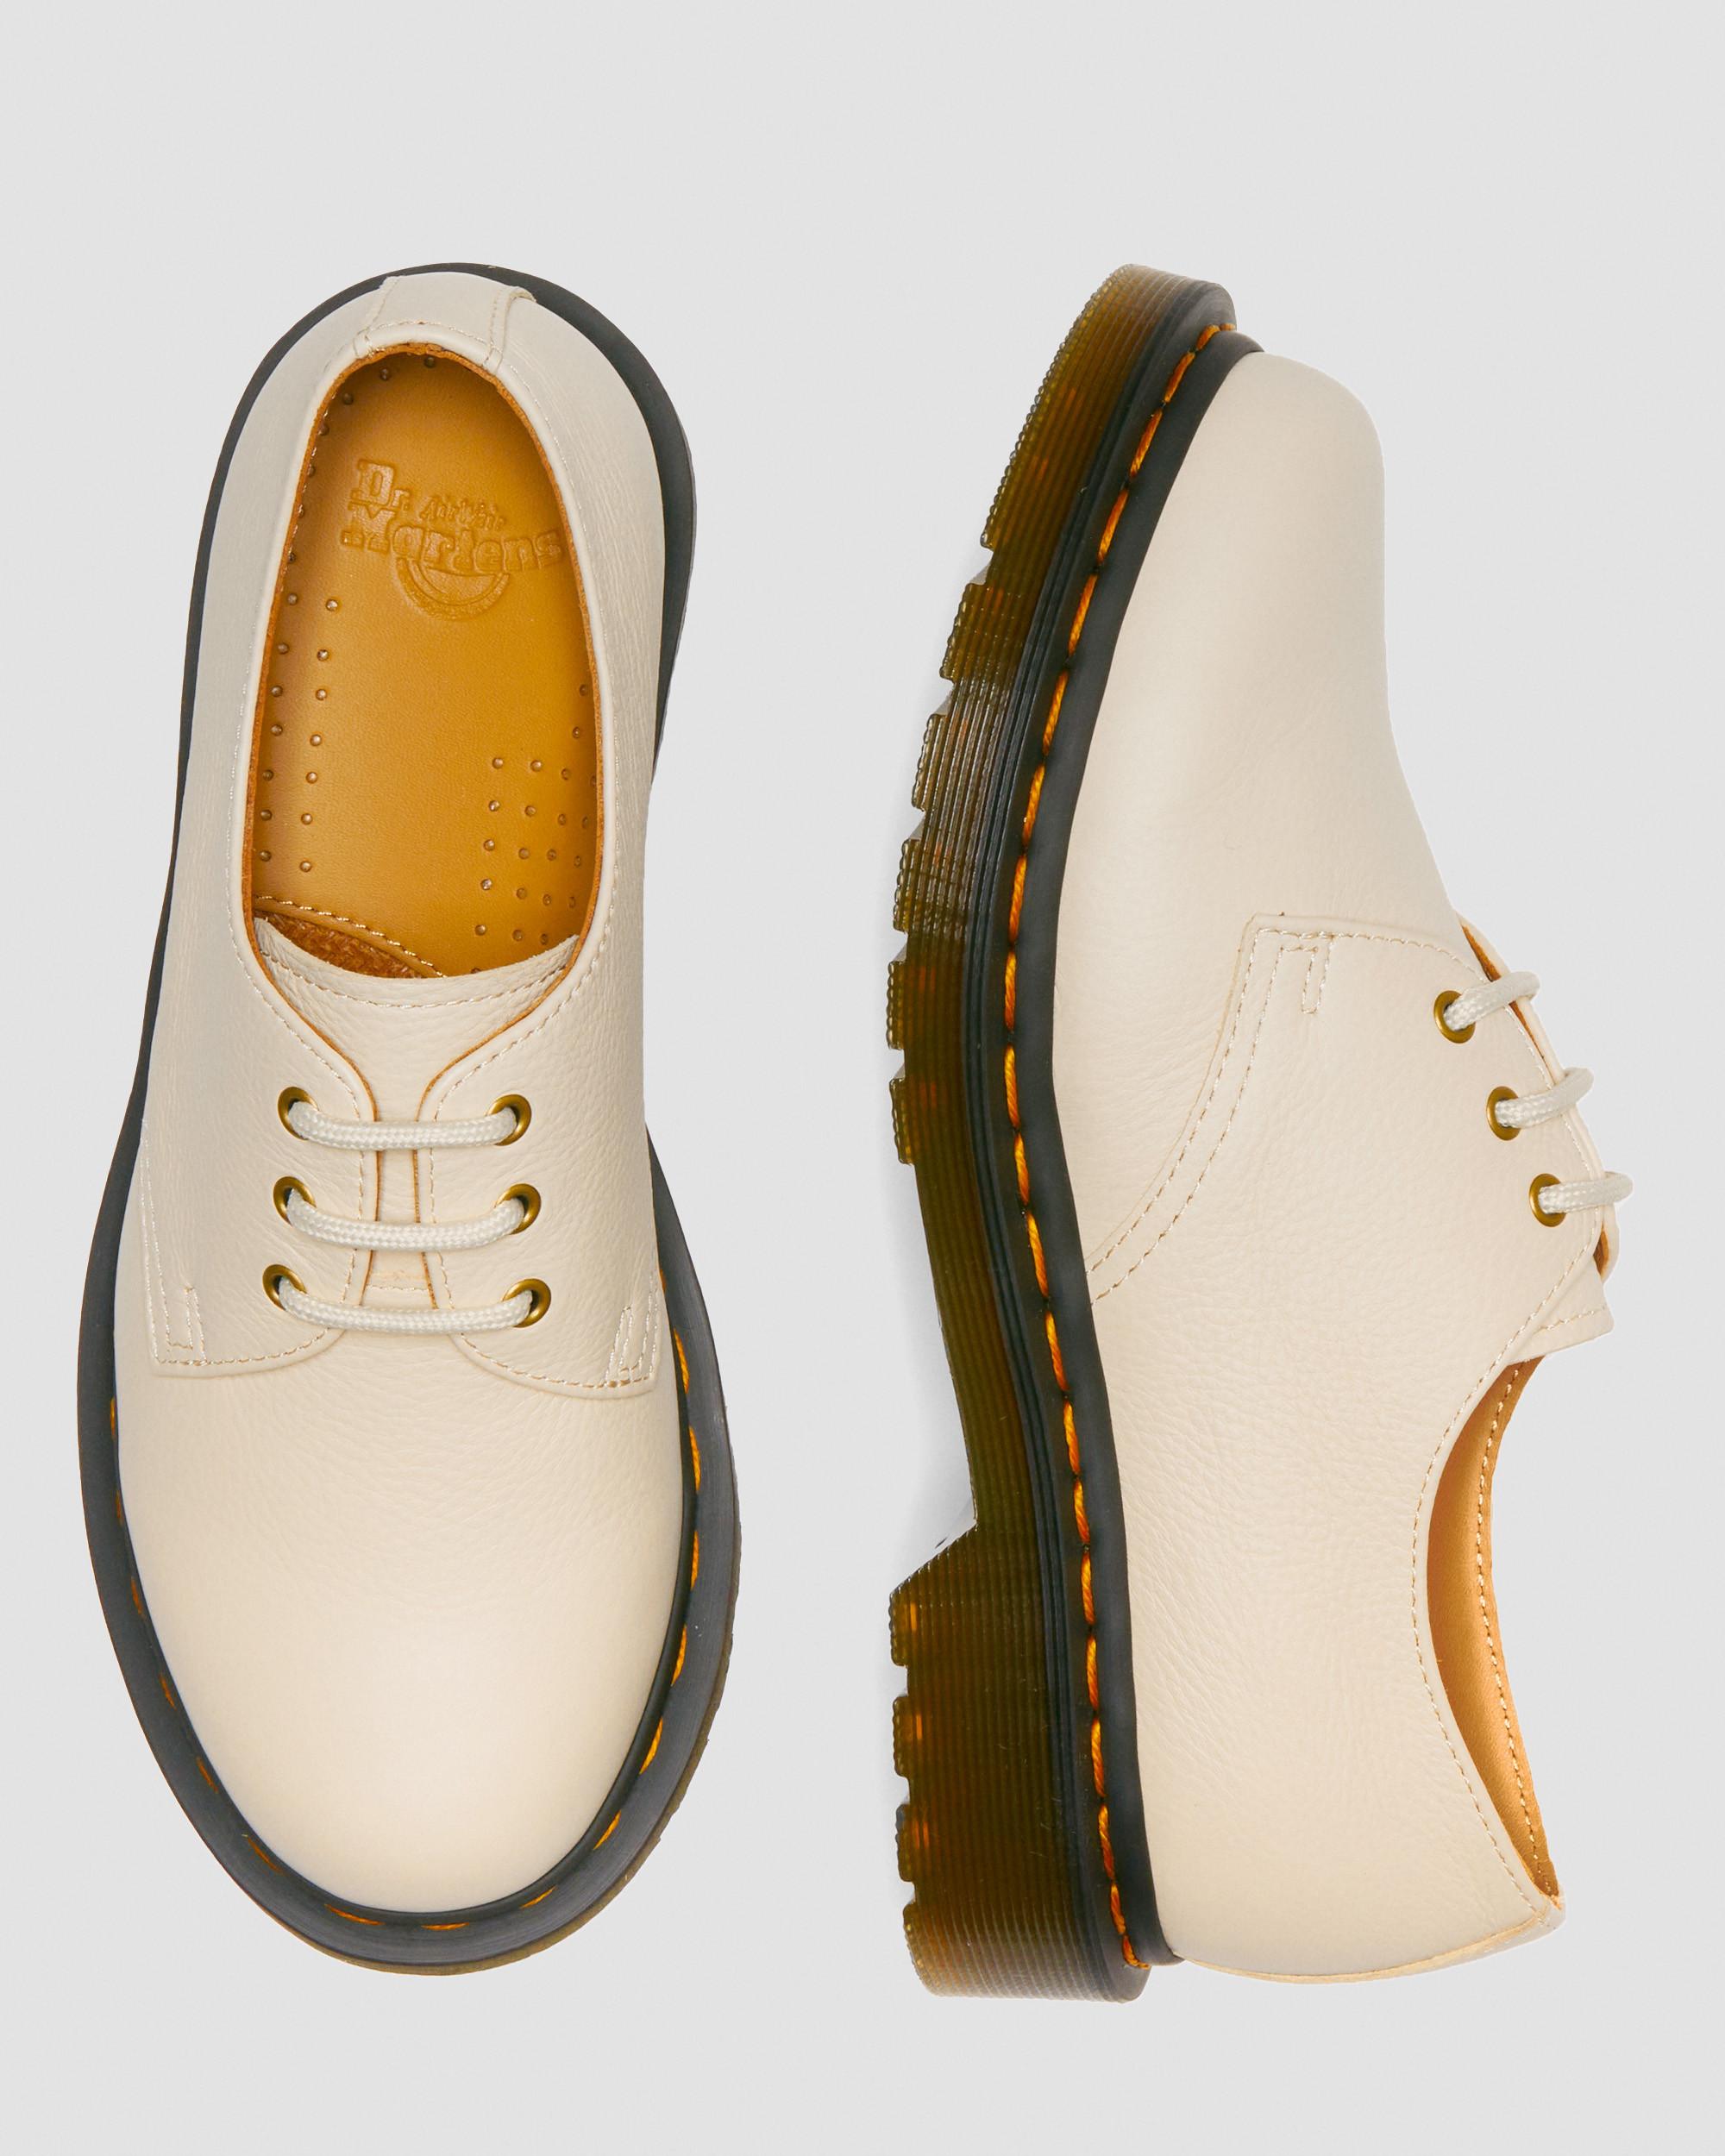 1461 Virginia Leather Oxford Shoes1461 Virginia Leather Oxford Shoes Dr. Martens